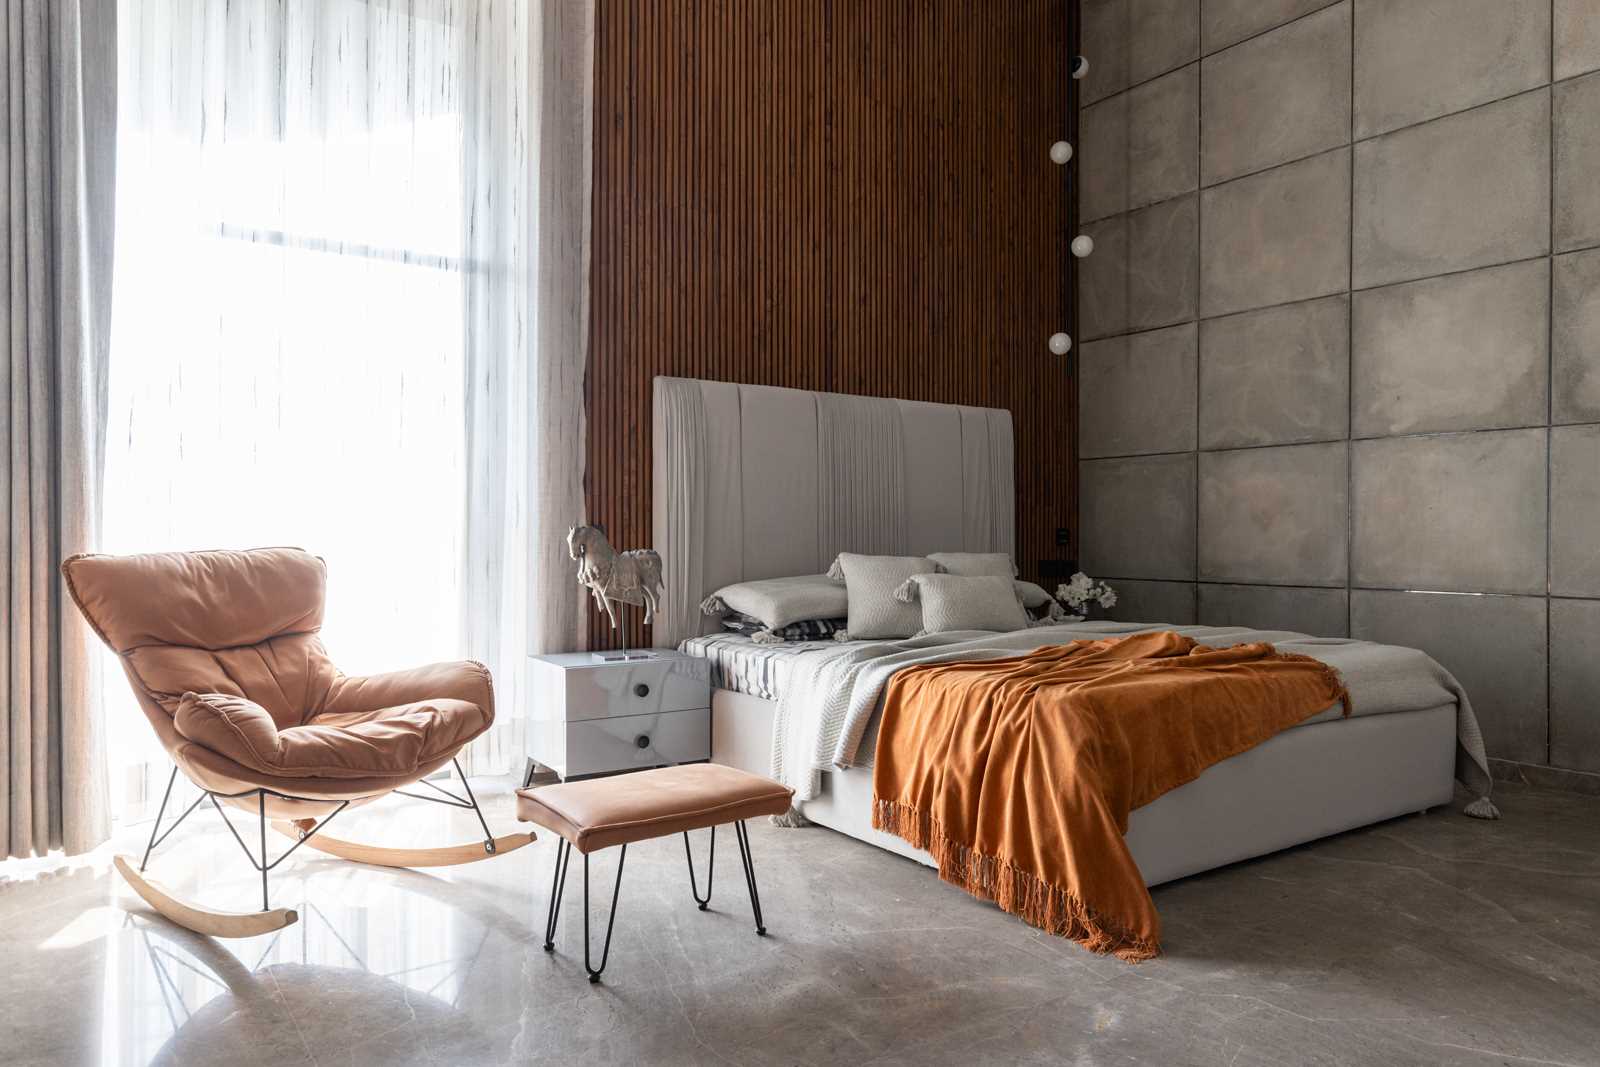 A contemporary bedroom with a wood accent wall.